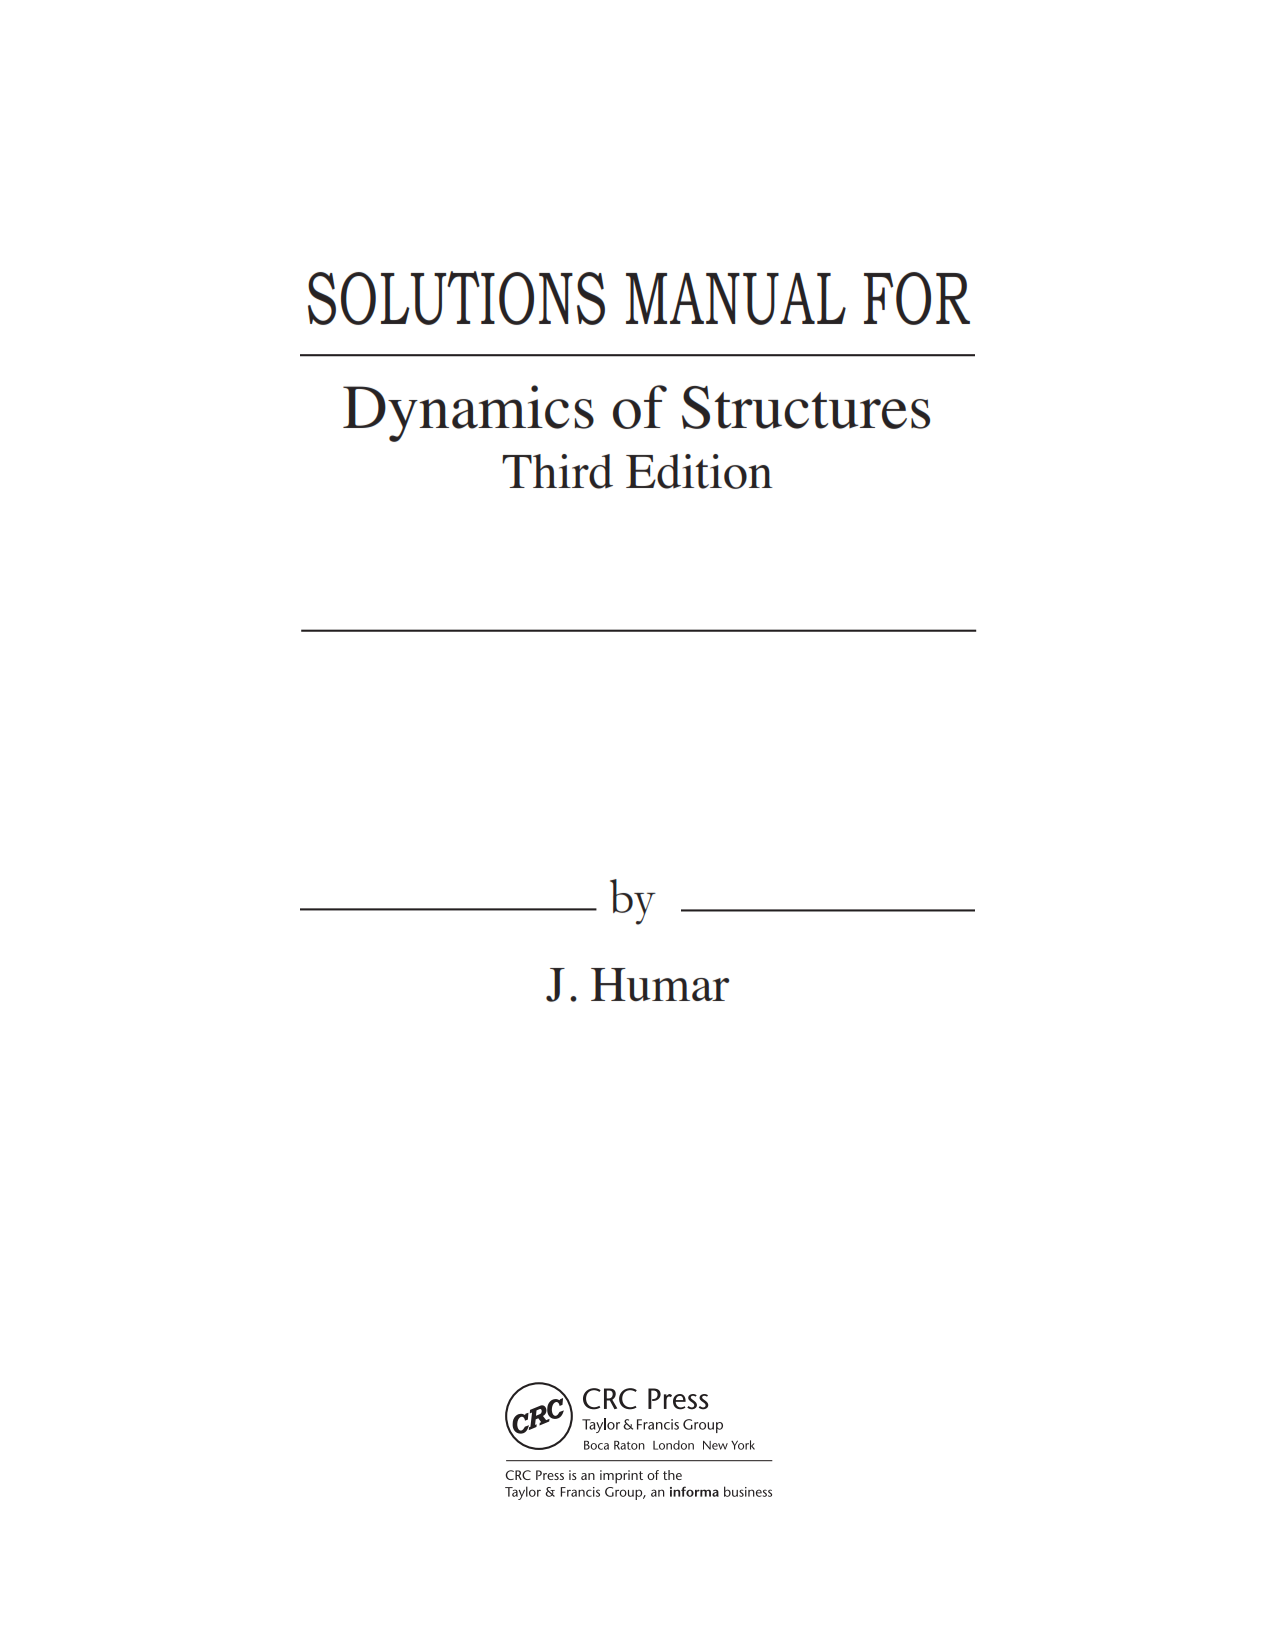 download free Dynamics of Structures 3rd edition written by Humar Solution Manual eBook in pdf format pdf | gioumeh